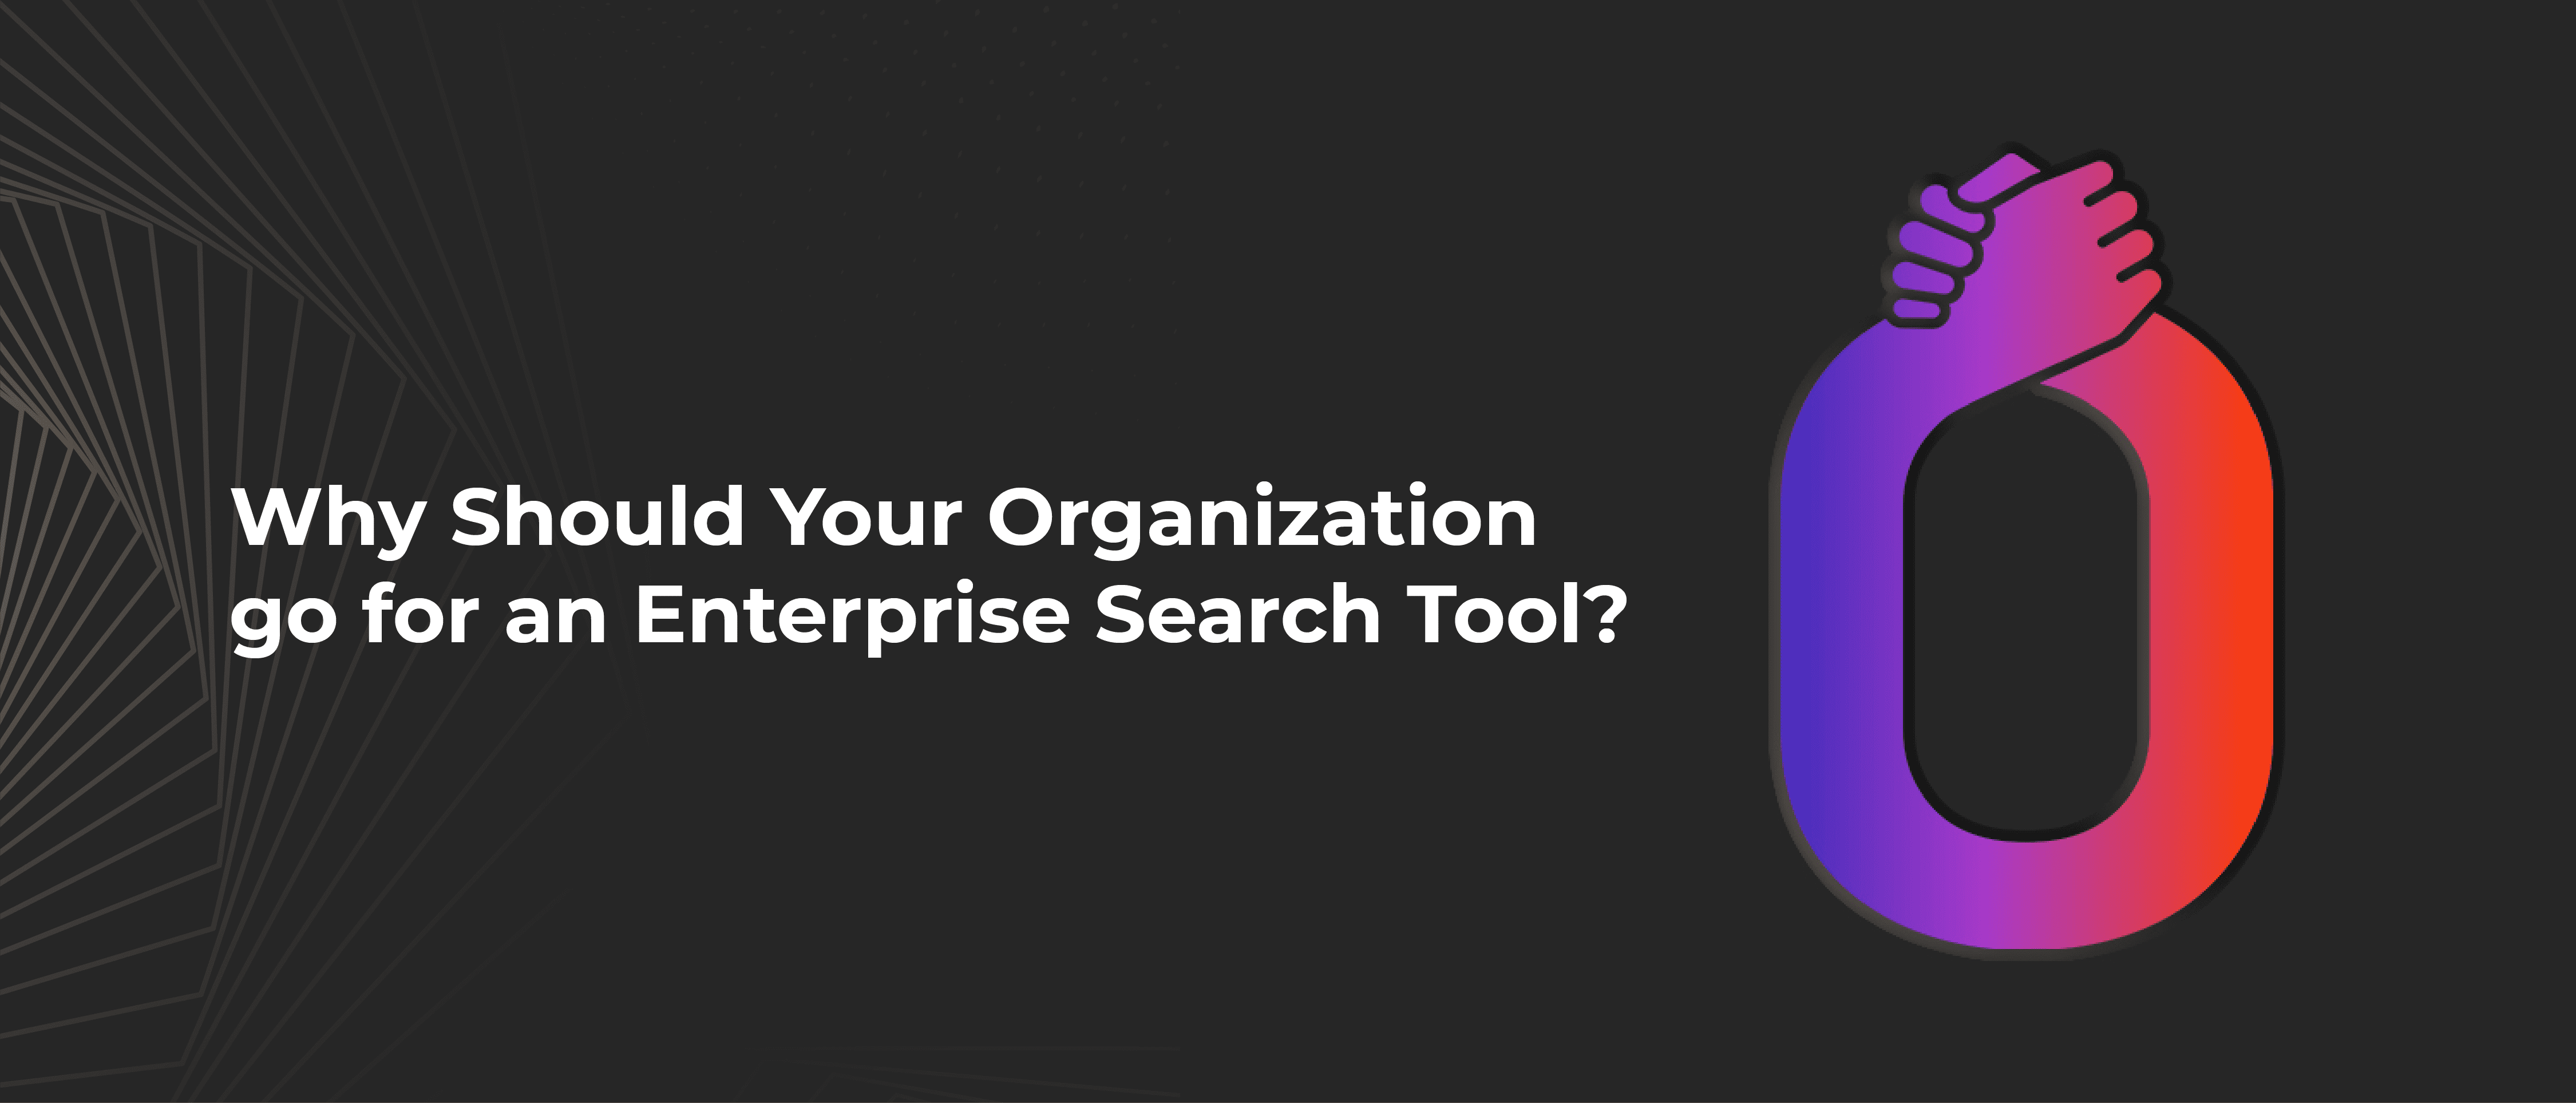 Why Should Your Organization go for an Enterprise Search Tool?